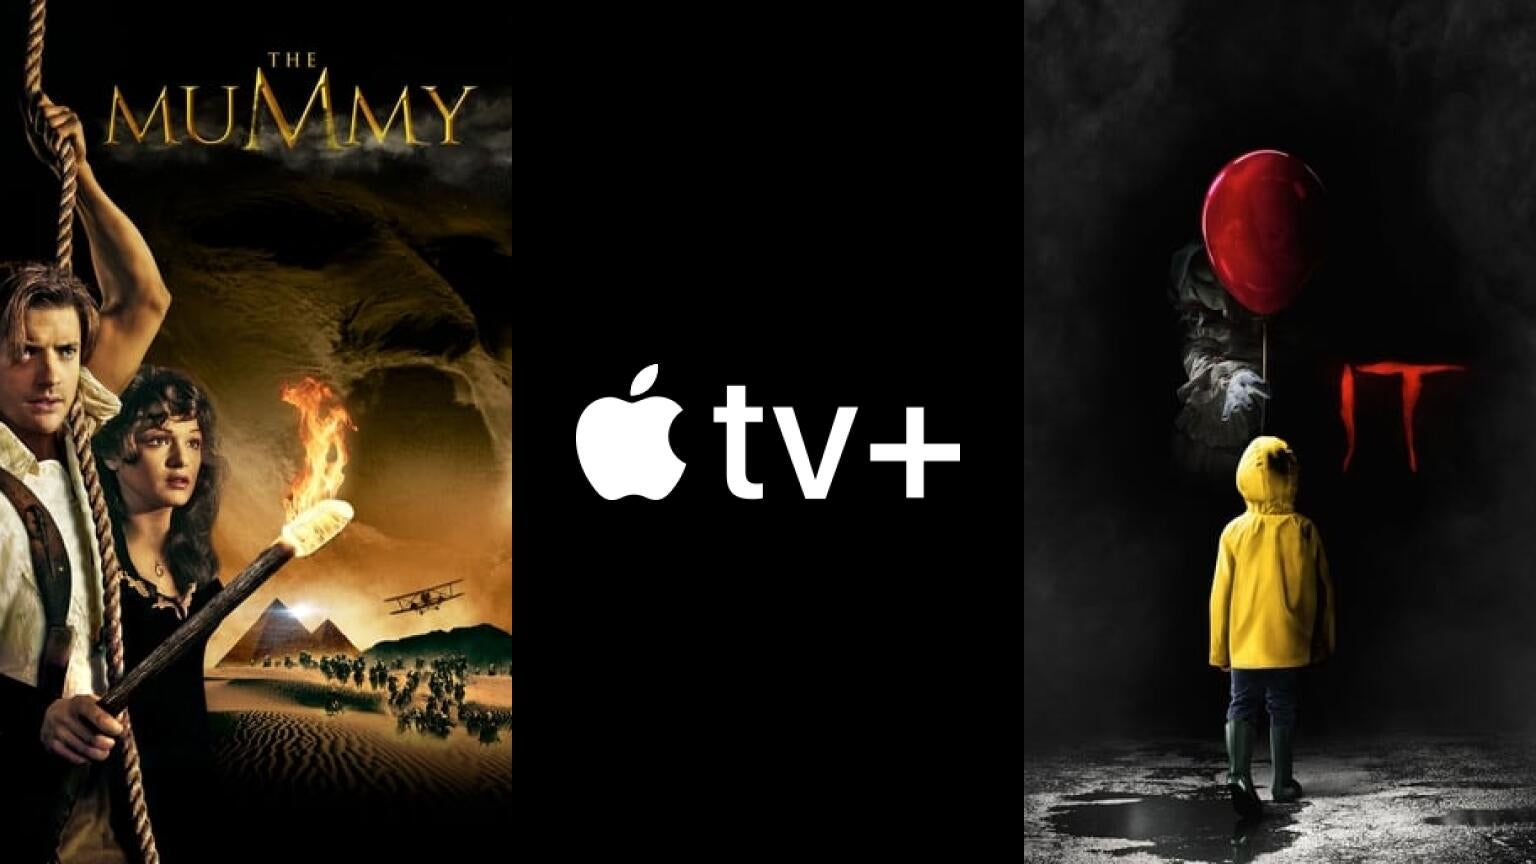 Apple TV+ has licensed a new batch of movies, including The Mummy and It.